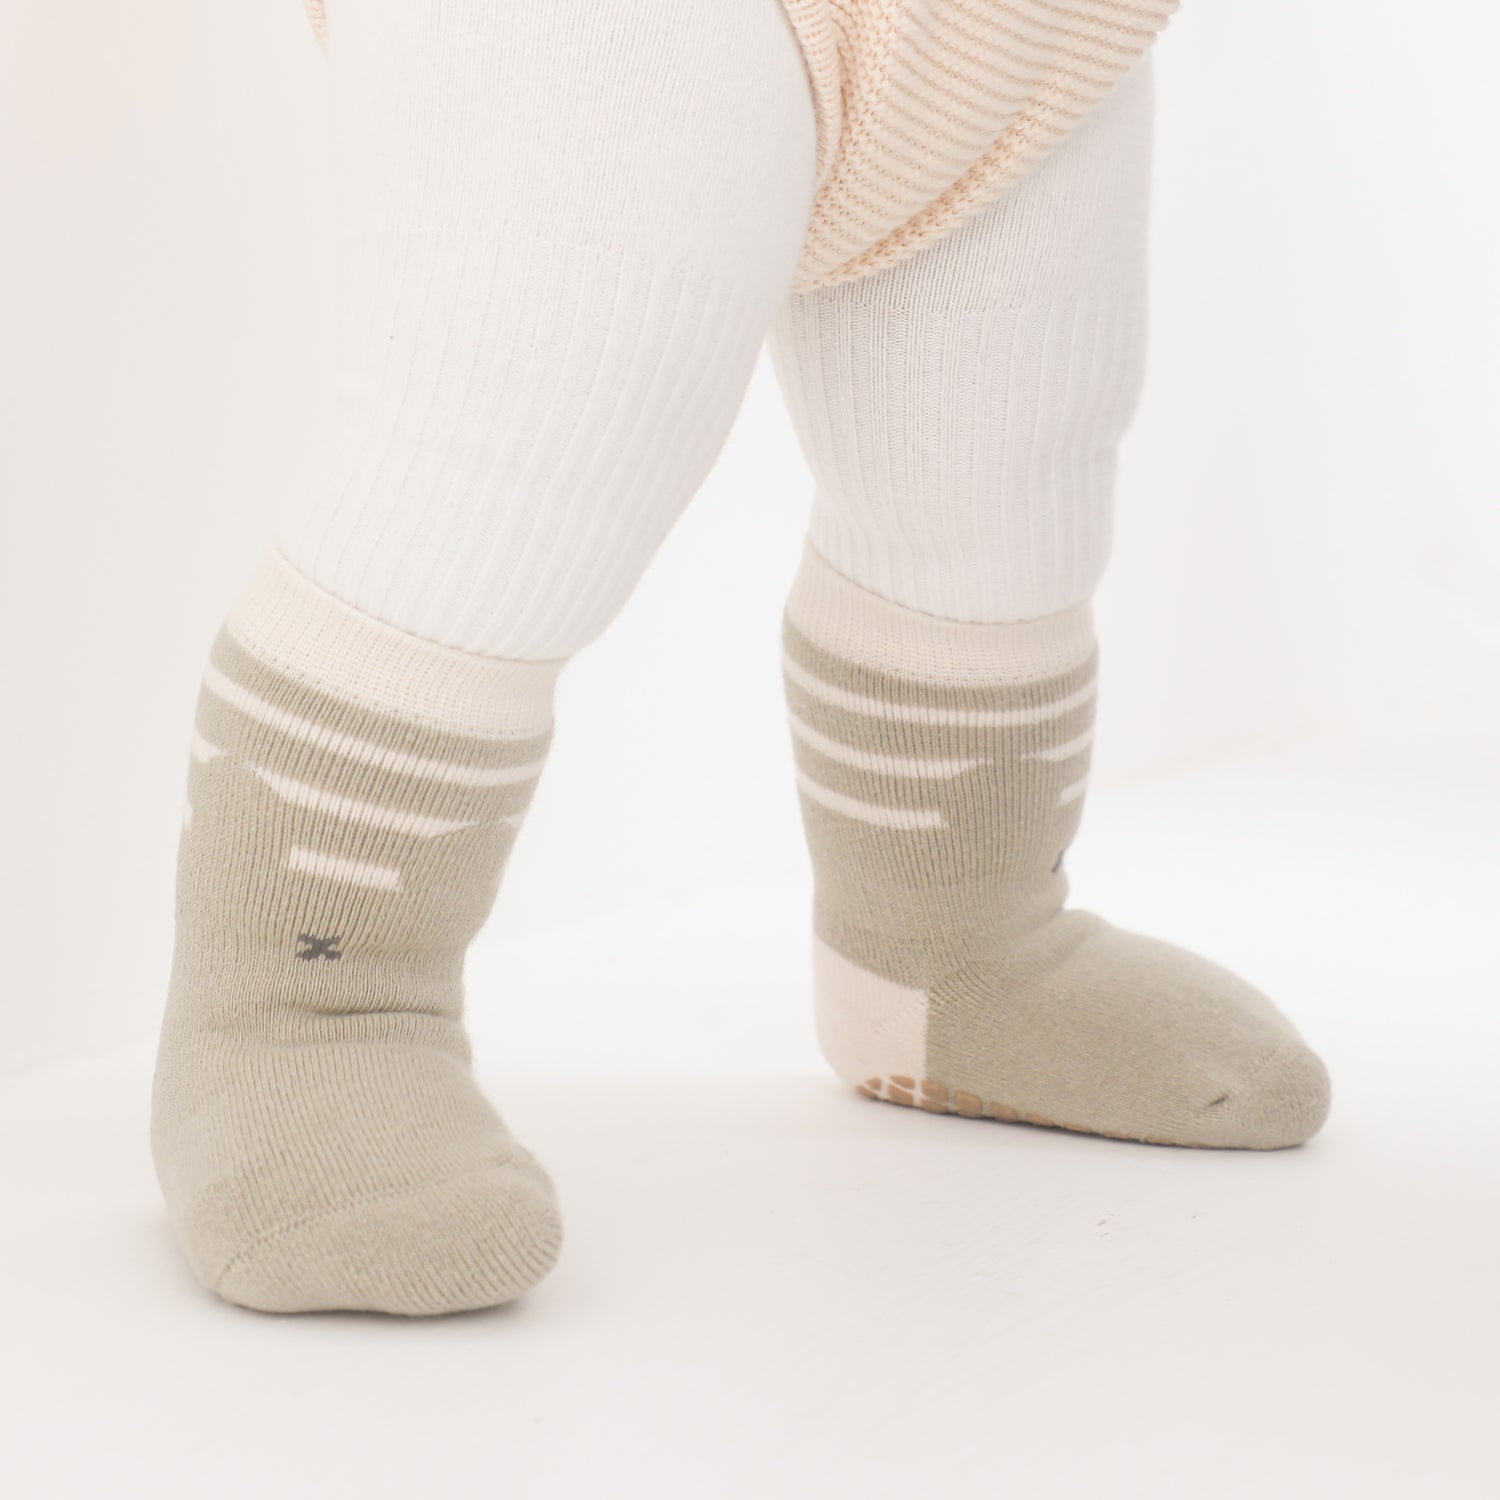 Non slip infant socks with cushioned soles for comfort